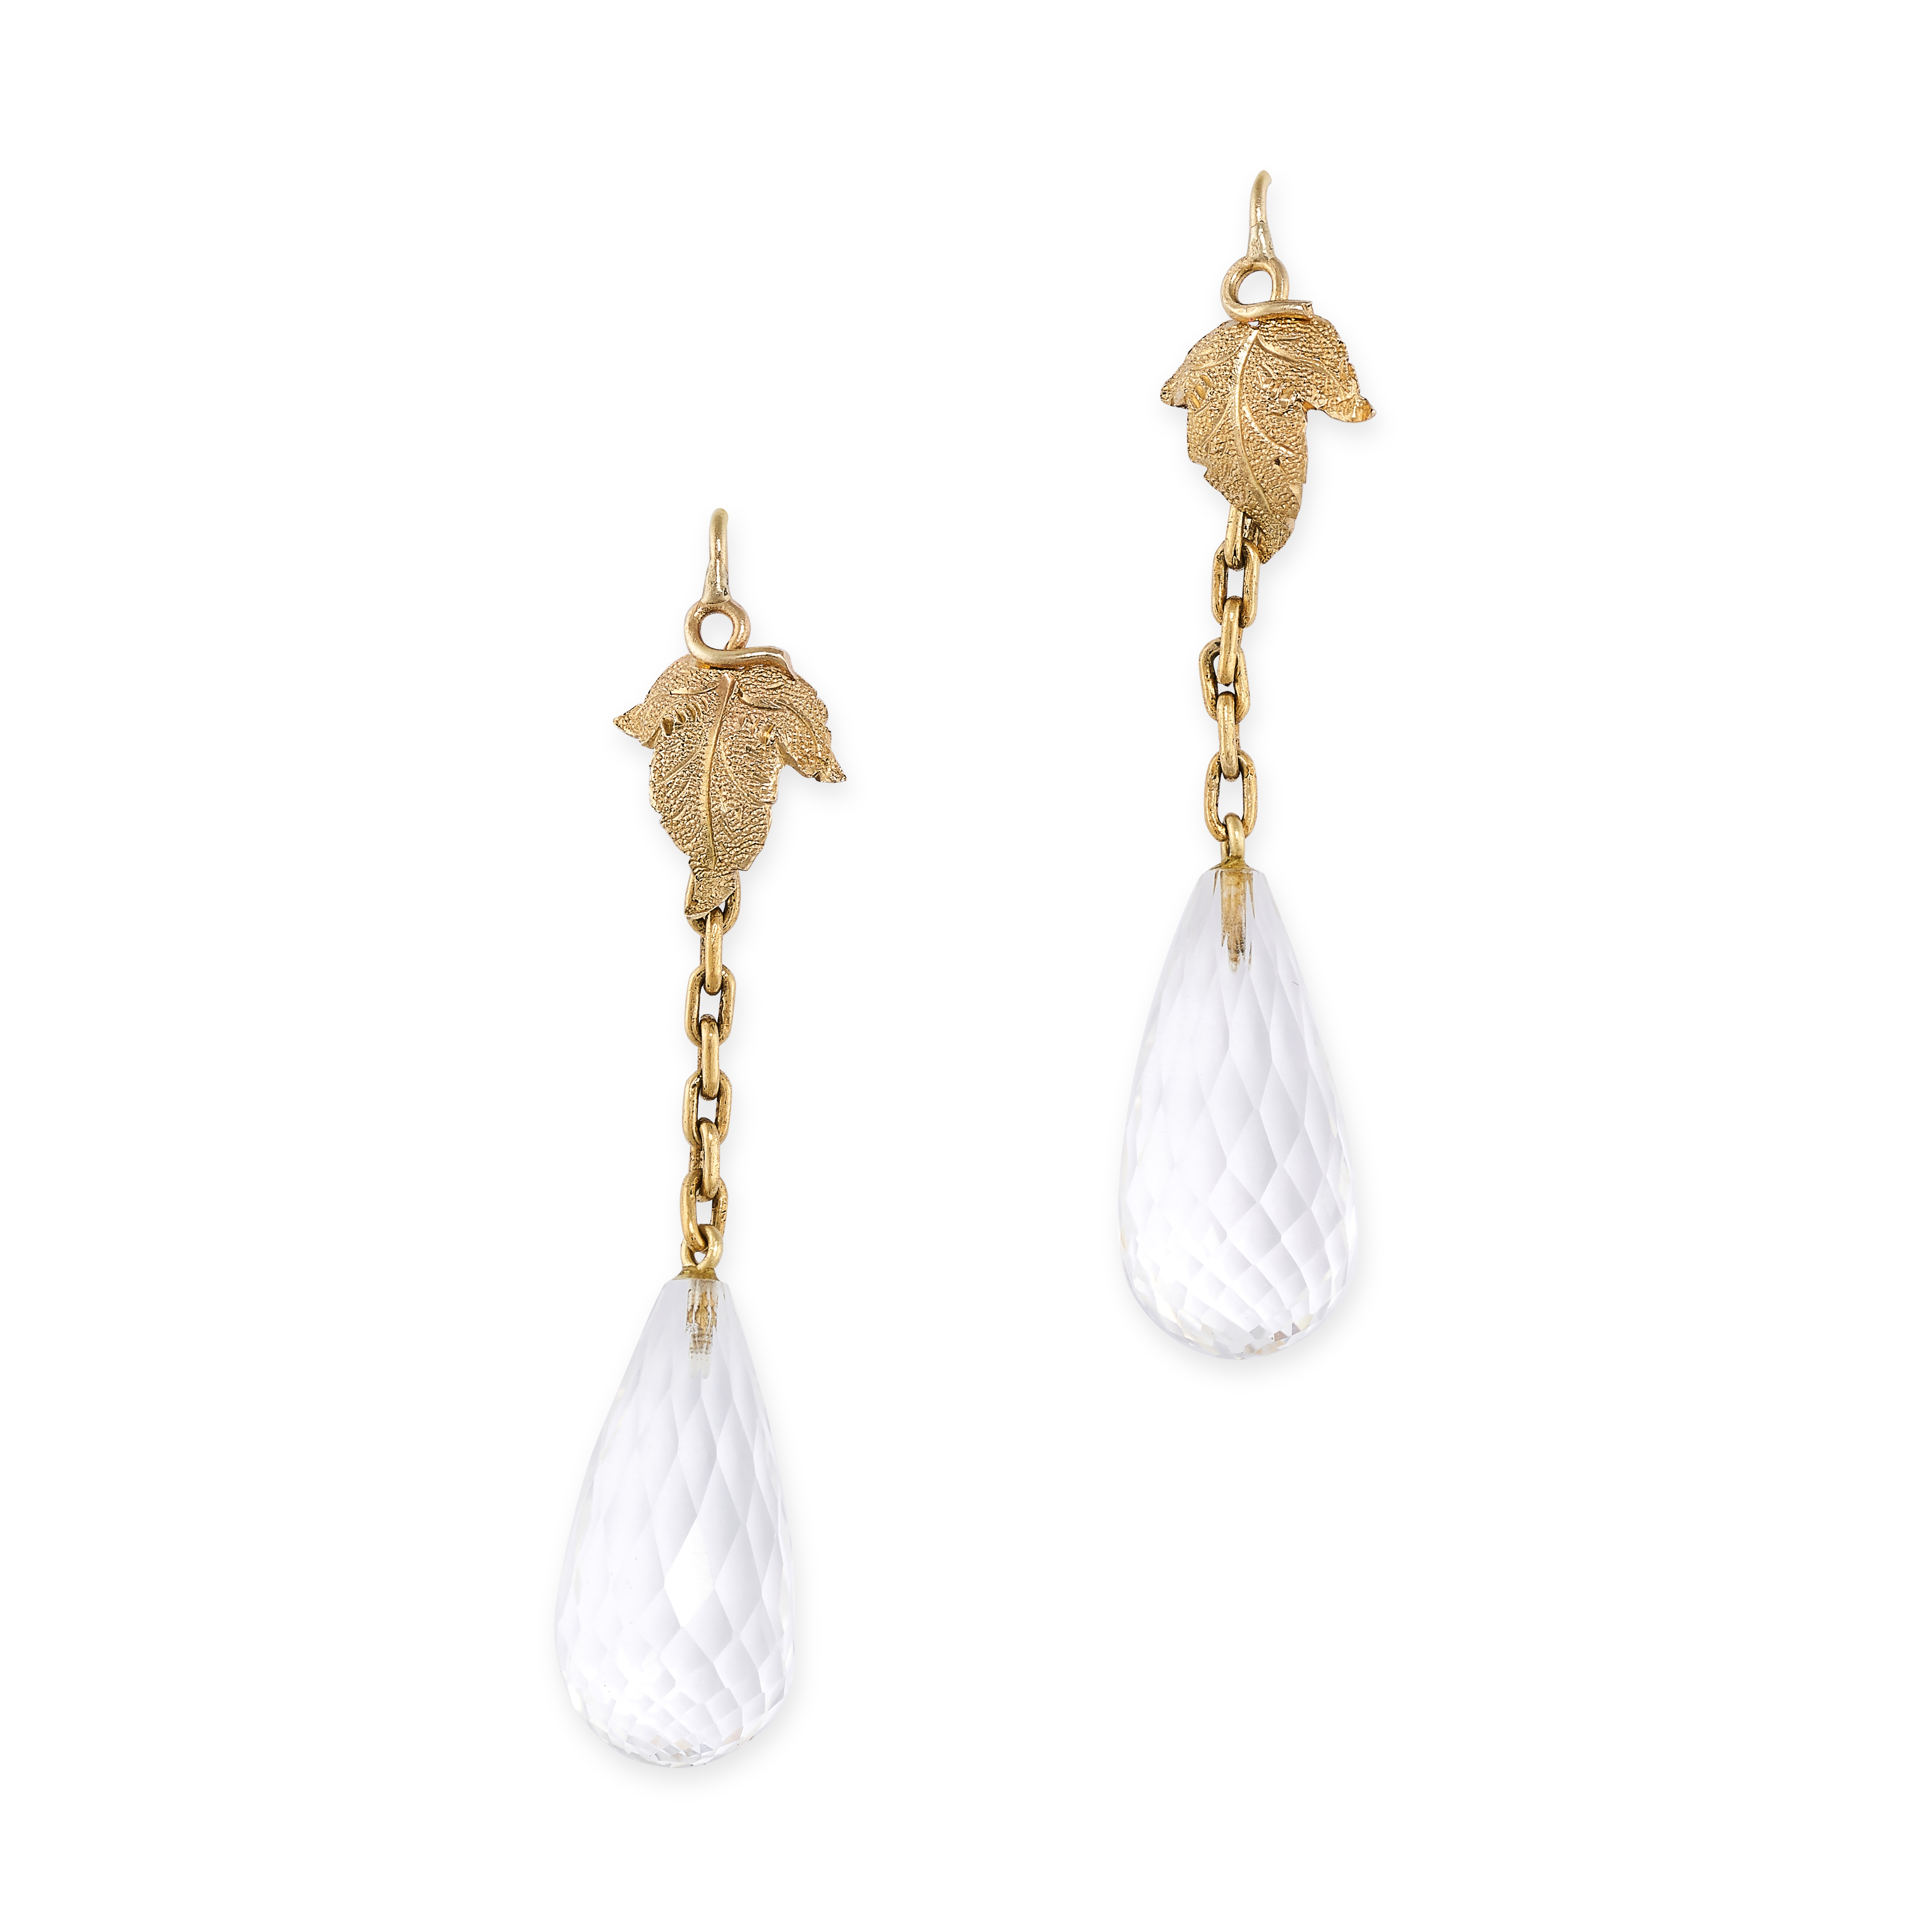 A PAIR OF ROCK CRYSTAL DROP EARRINGS in yellow gold, each set with a faceted rock crystal